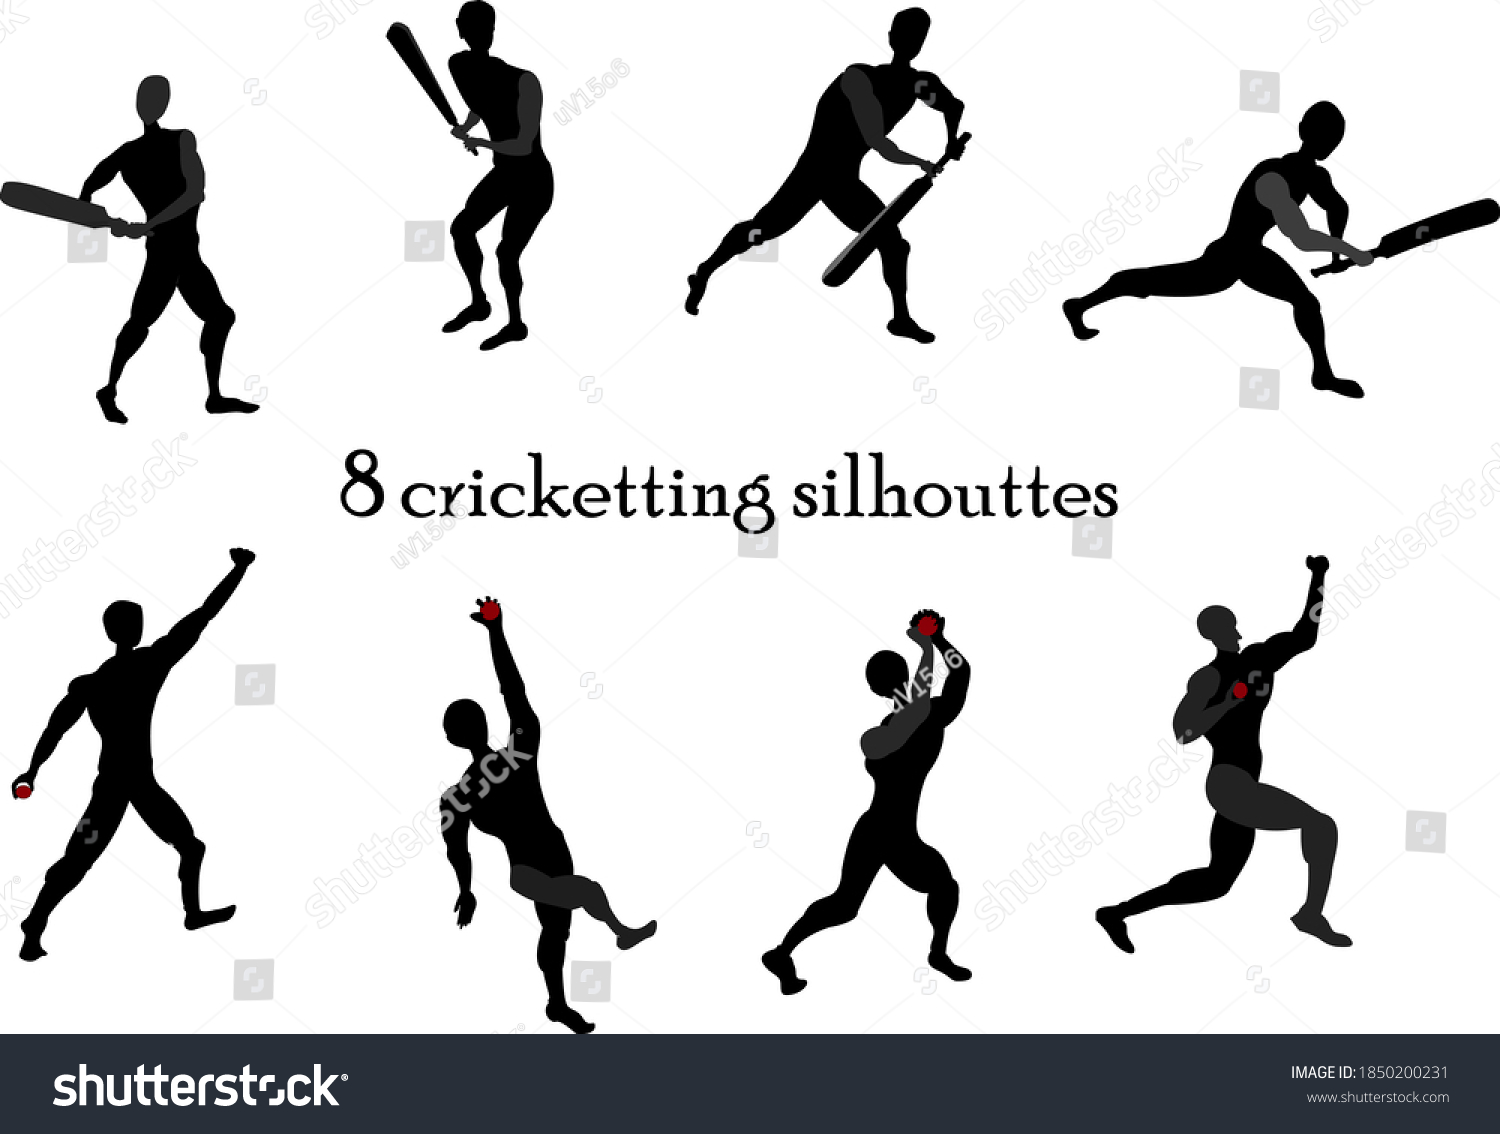 SVG of 8 cricket gesture silhouettes for posters, invitations, greeting cards  svg